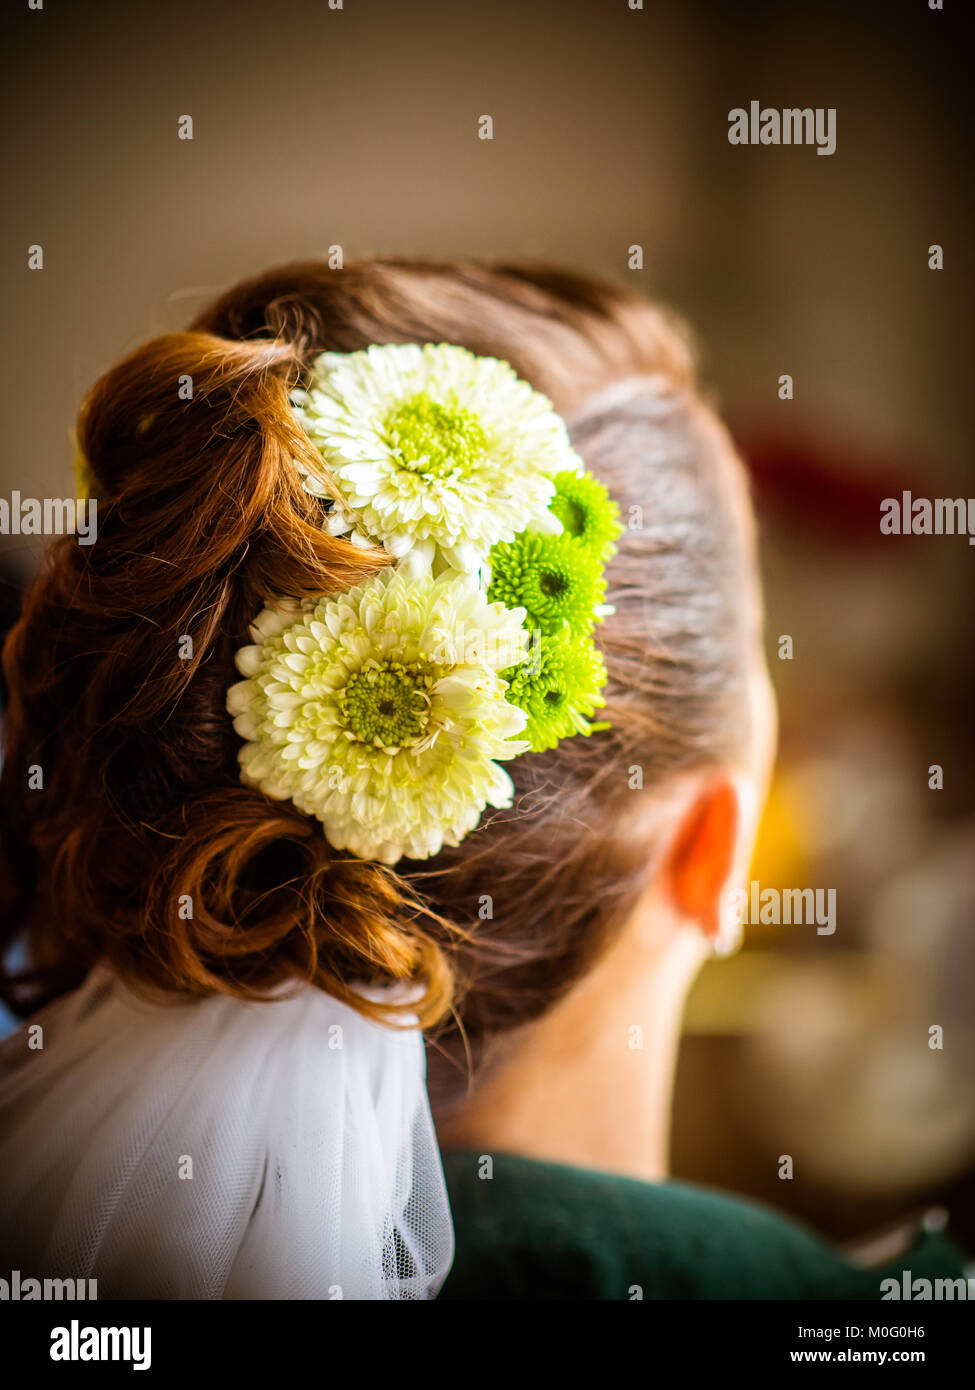 Hair of bride with flowers Stock Photo